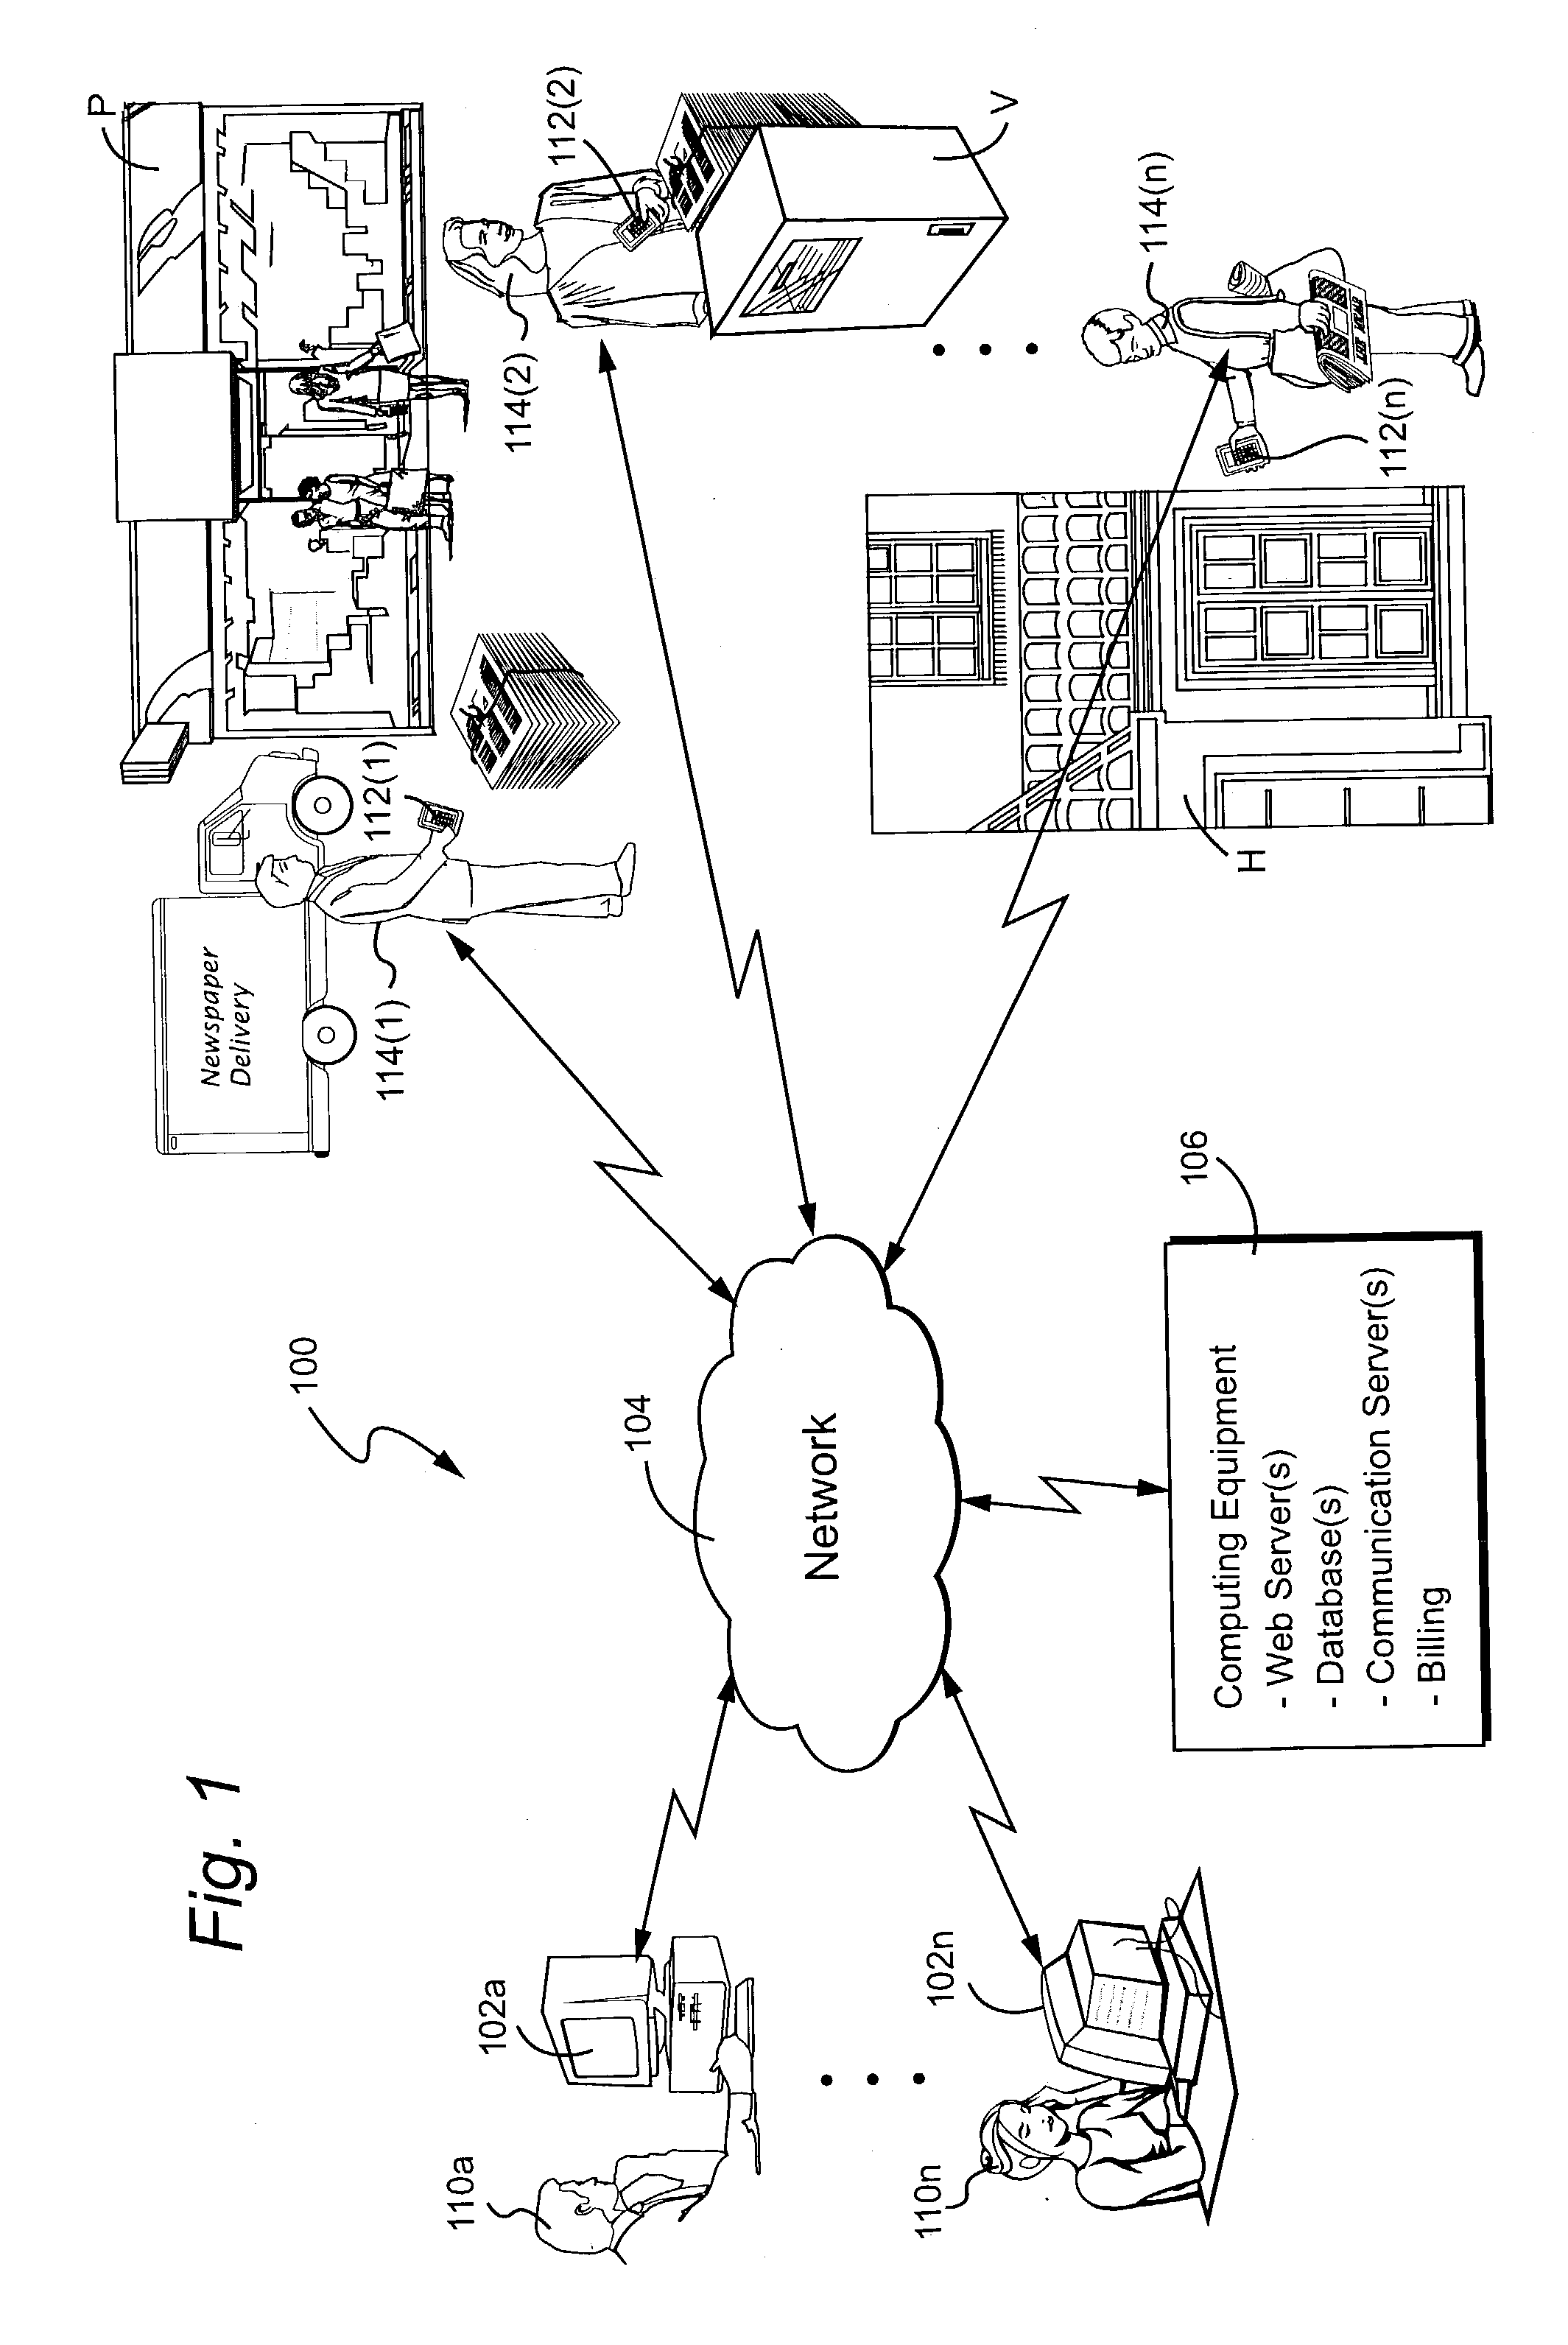 Method and apparatus for supporting delivery, sale and billing of perishable and time-sensitive goods such as newspapers, periodicals and direct marketing and promotional materials